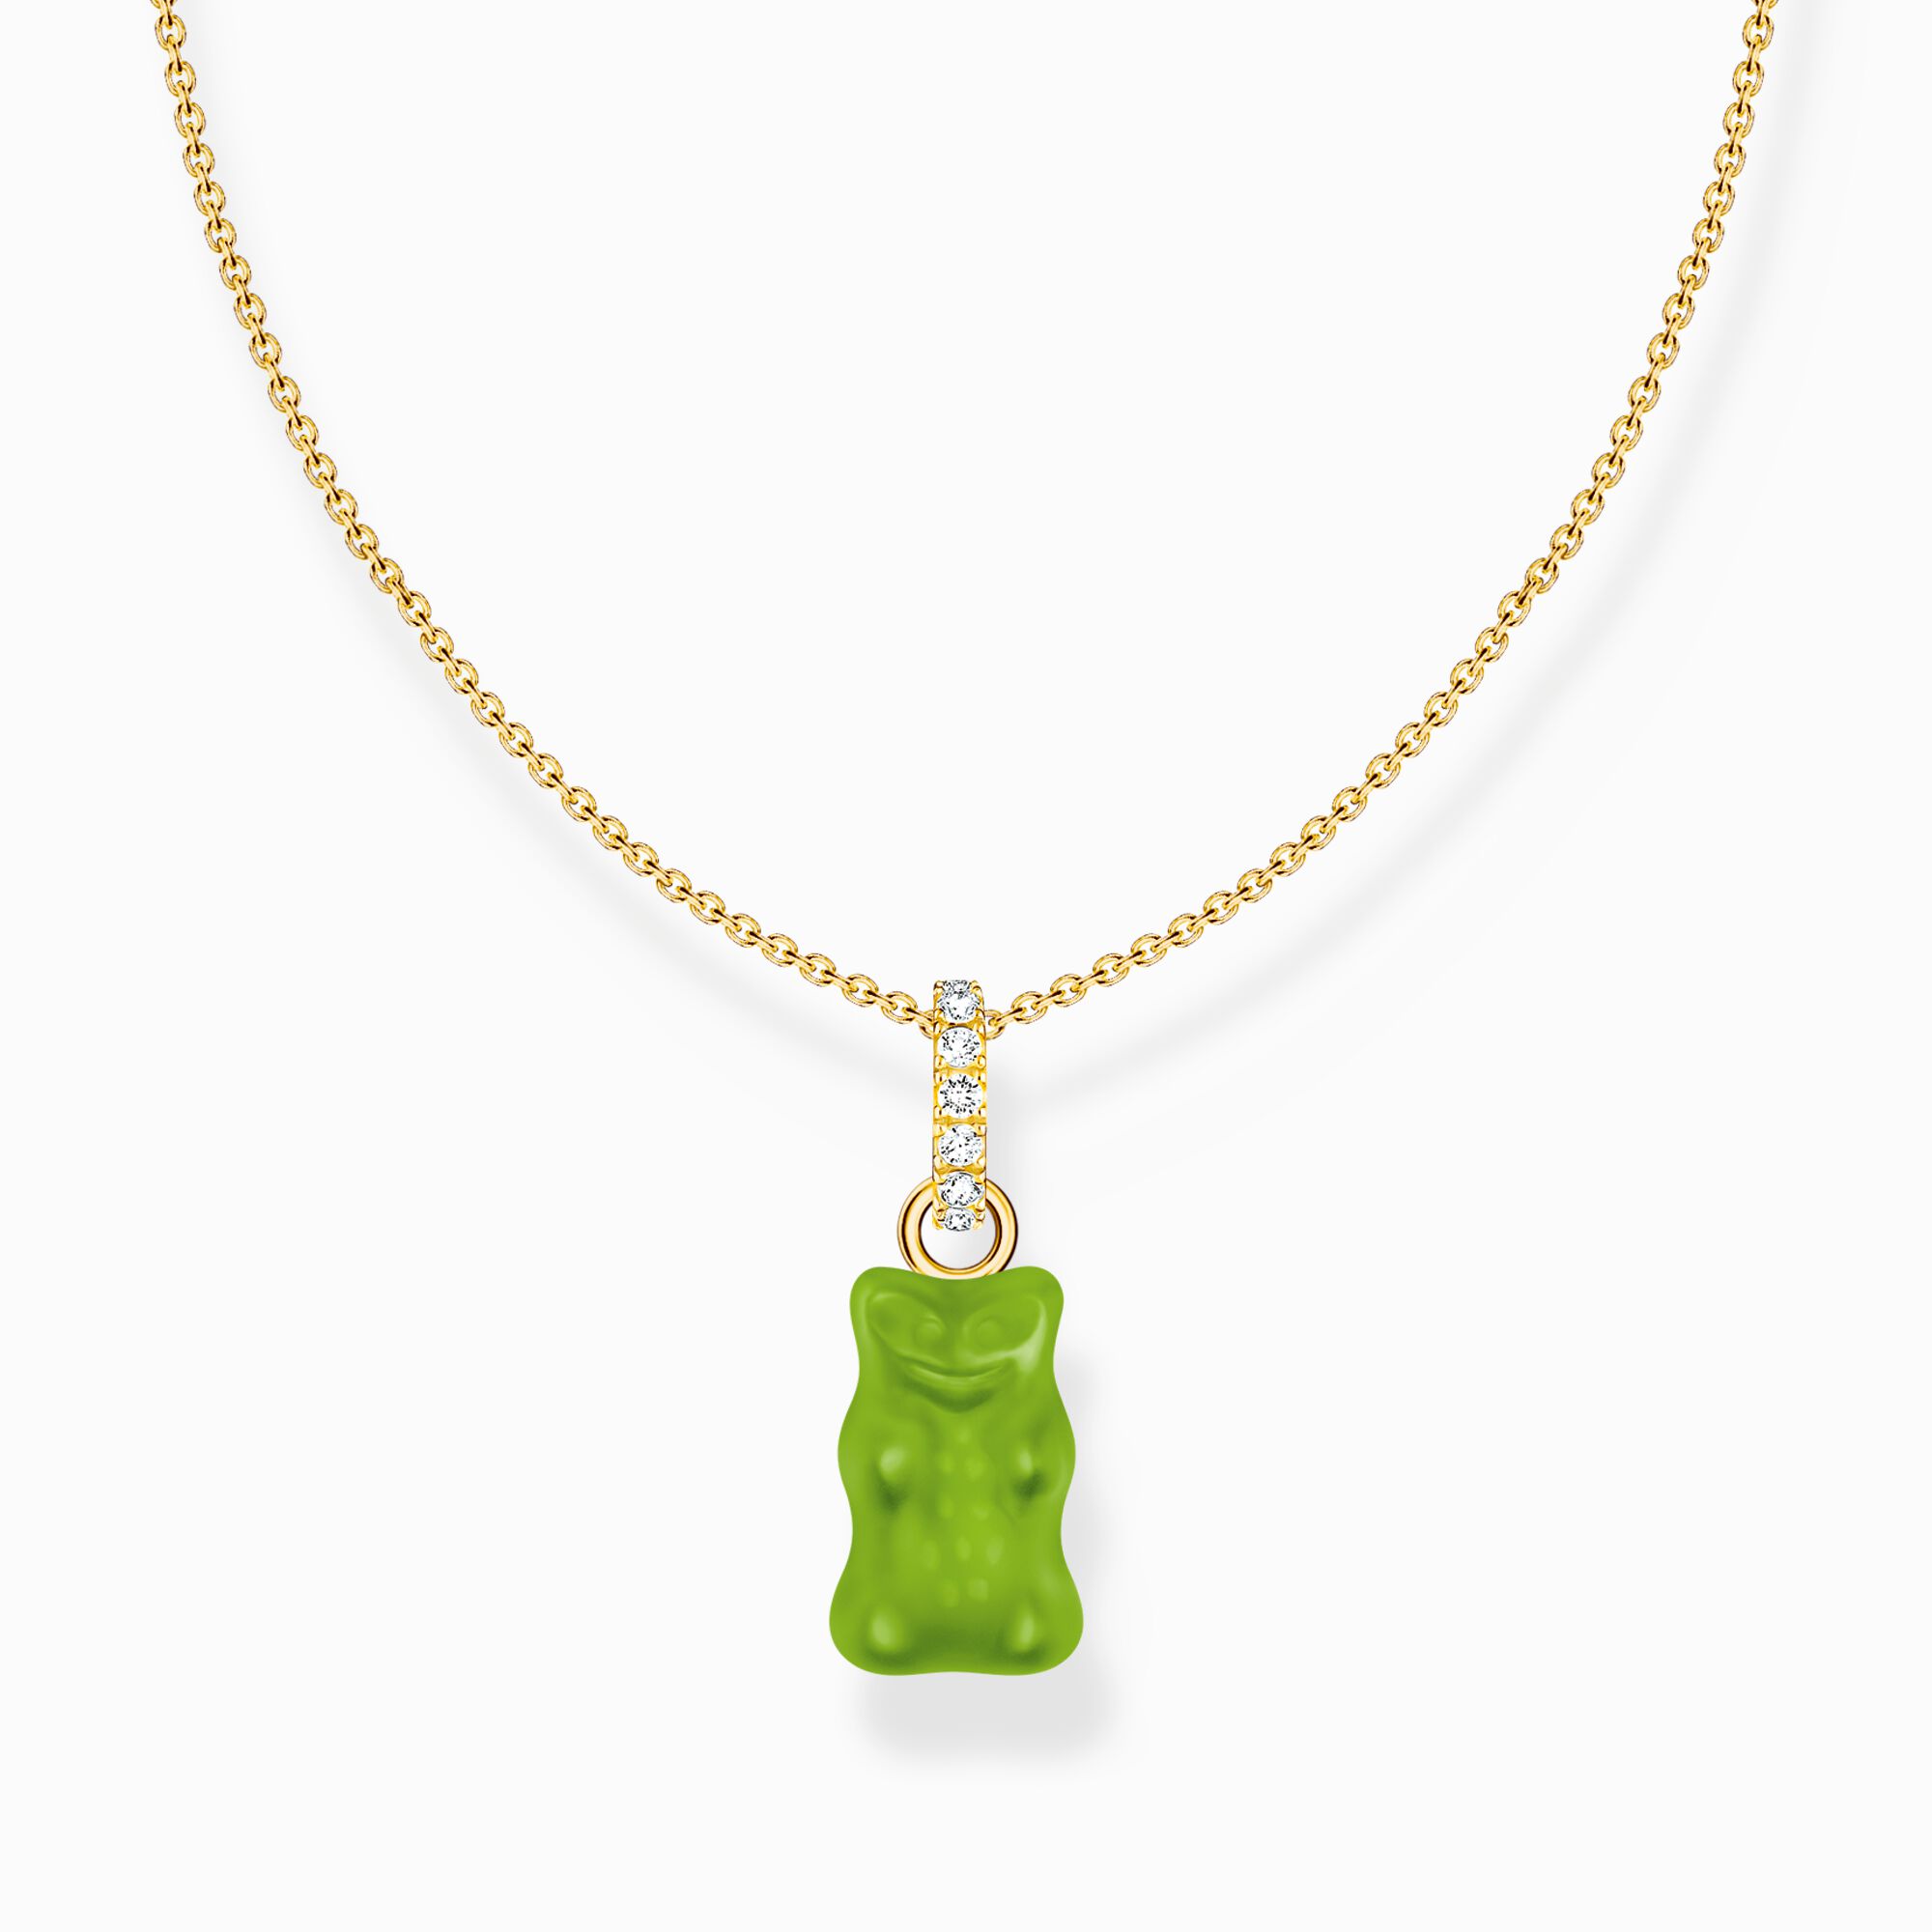 Gold-plated necklace with green goldbears pendant and zirconia from the Charming Collection collection in the THOMAS SABO online store